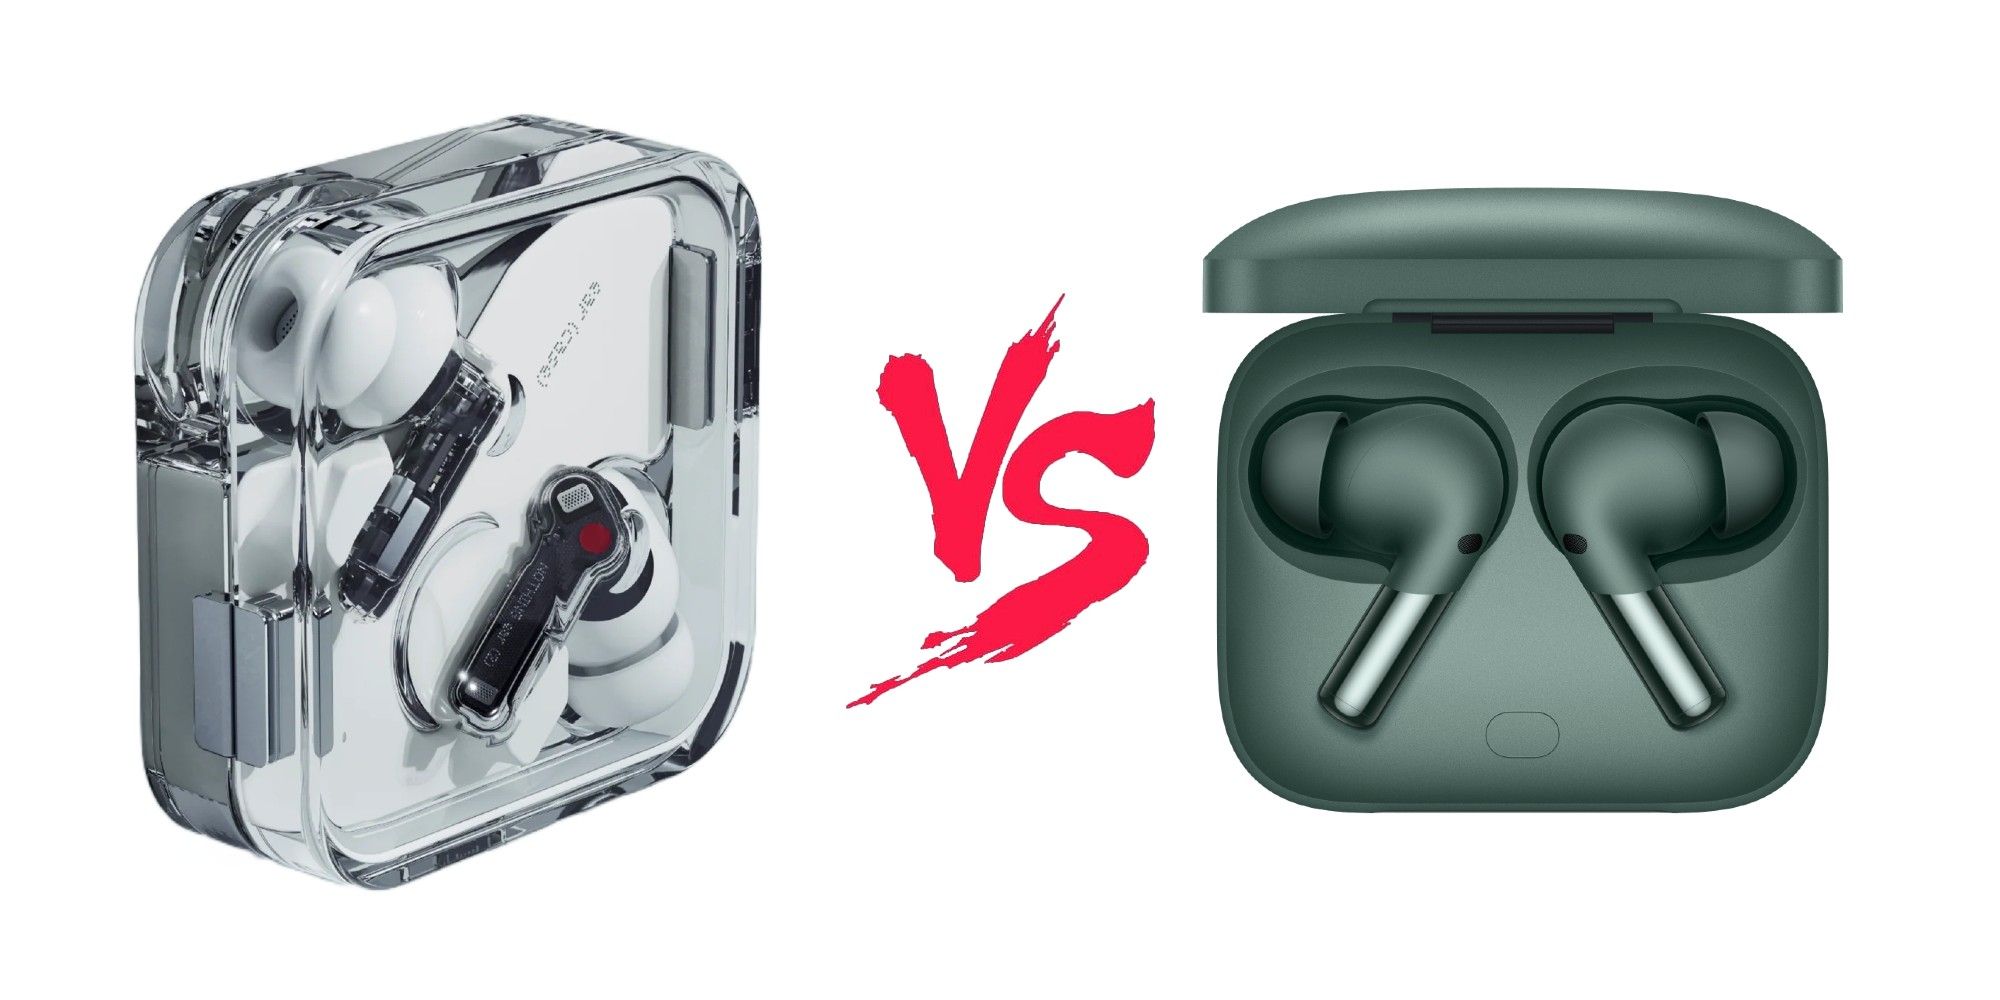 Nothing Ear 2 VS Oppo Enco Air 3 Pro VS Oneplus Nord Buds 2: Which  Affordable Earbuds Are For You?